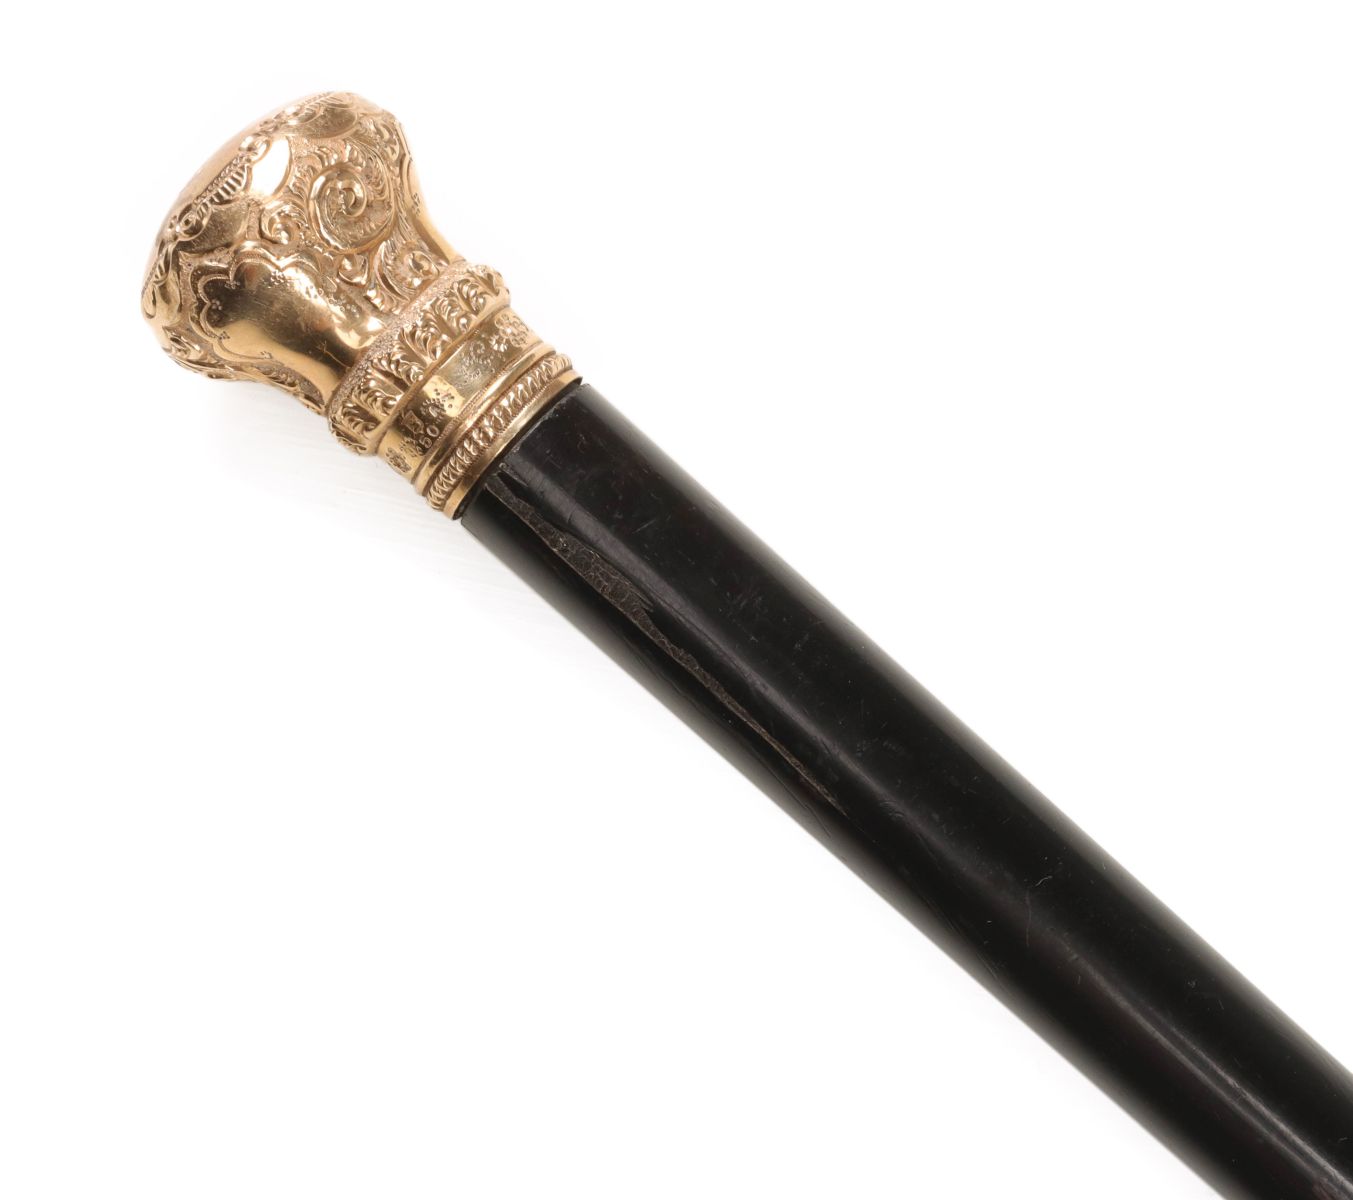 A SIMONS BROTHERS GOLD CROWN WALKING STICK